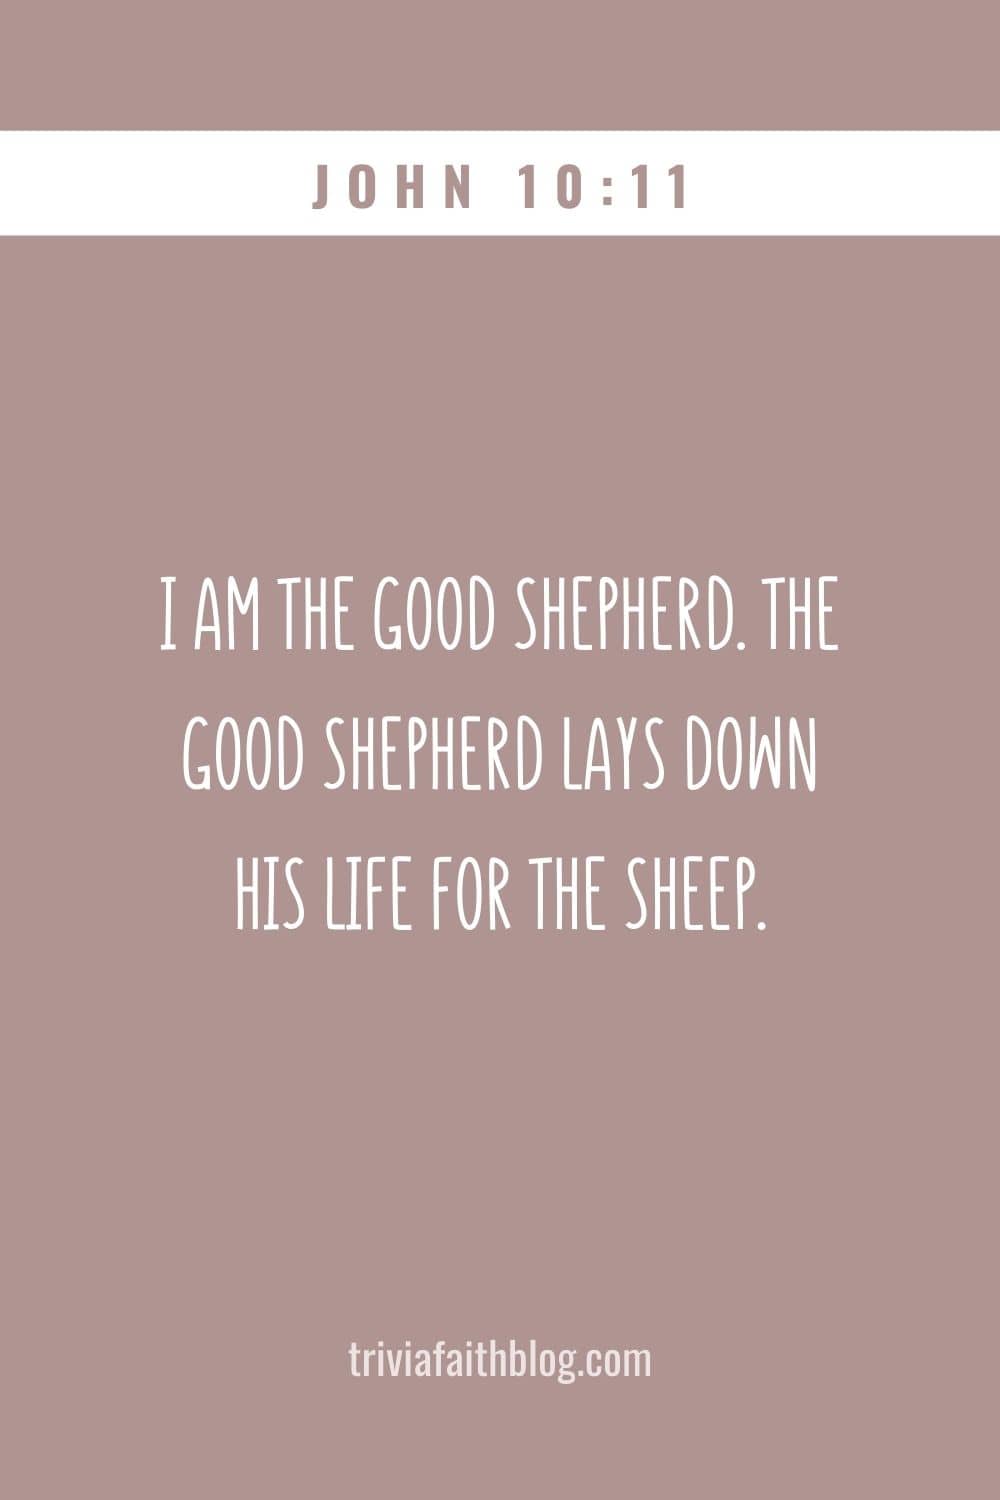 I am the good shepherd. The good shepherd lays down his life for the sheep